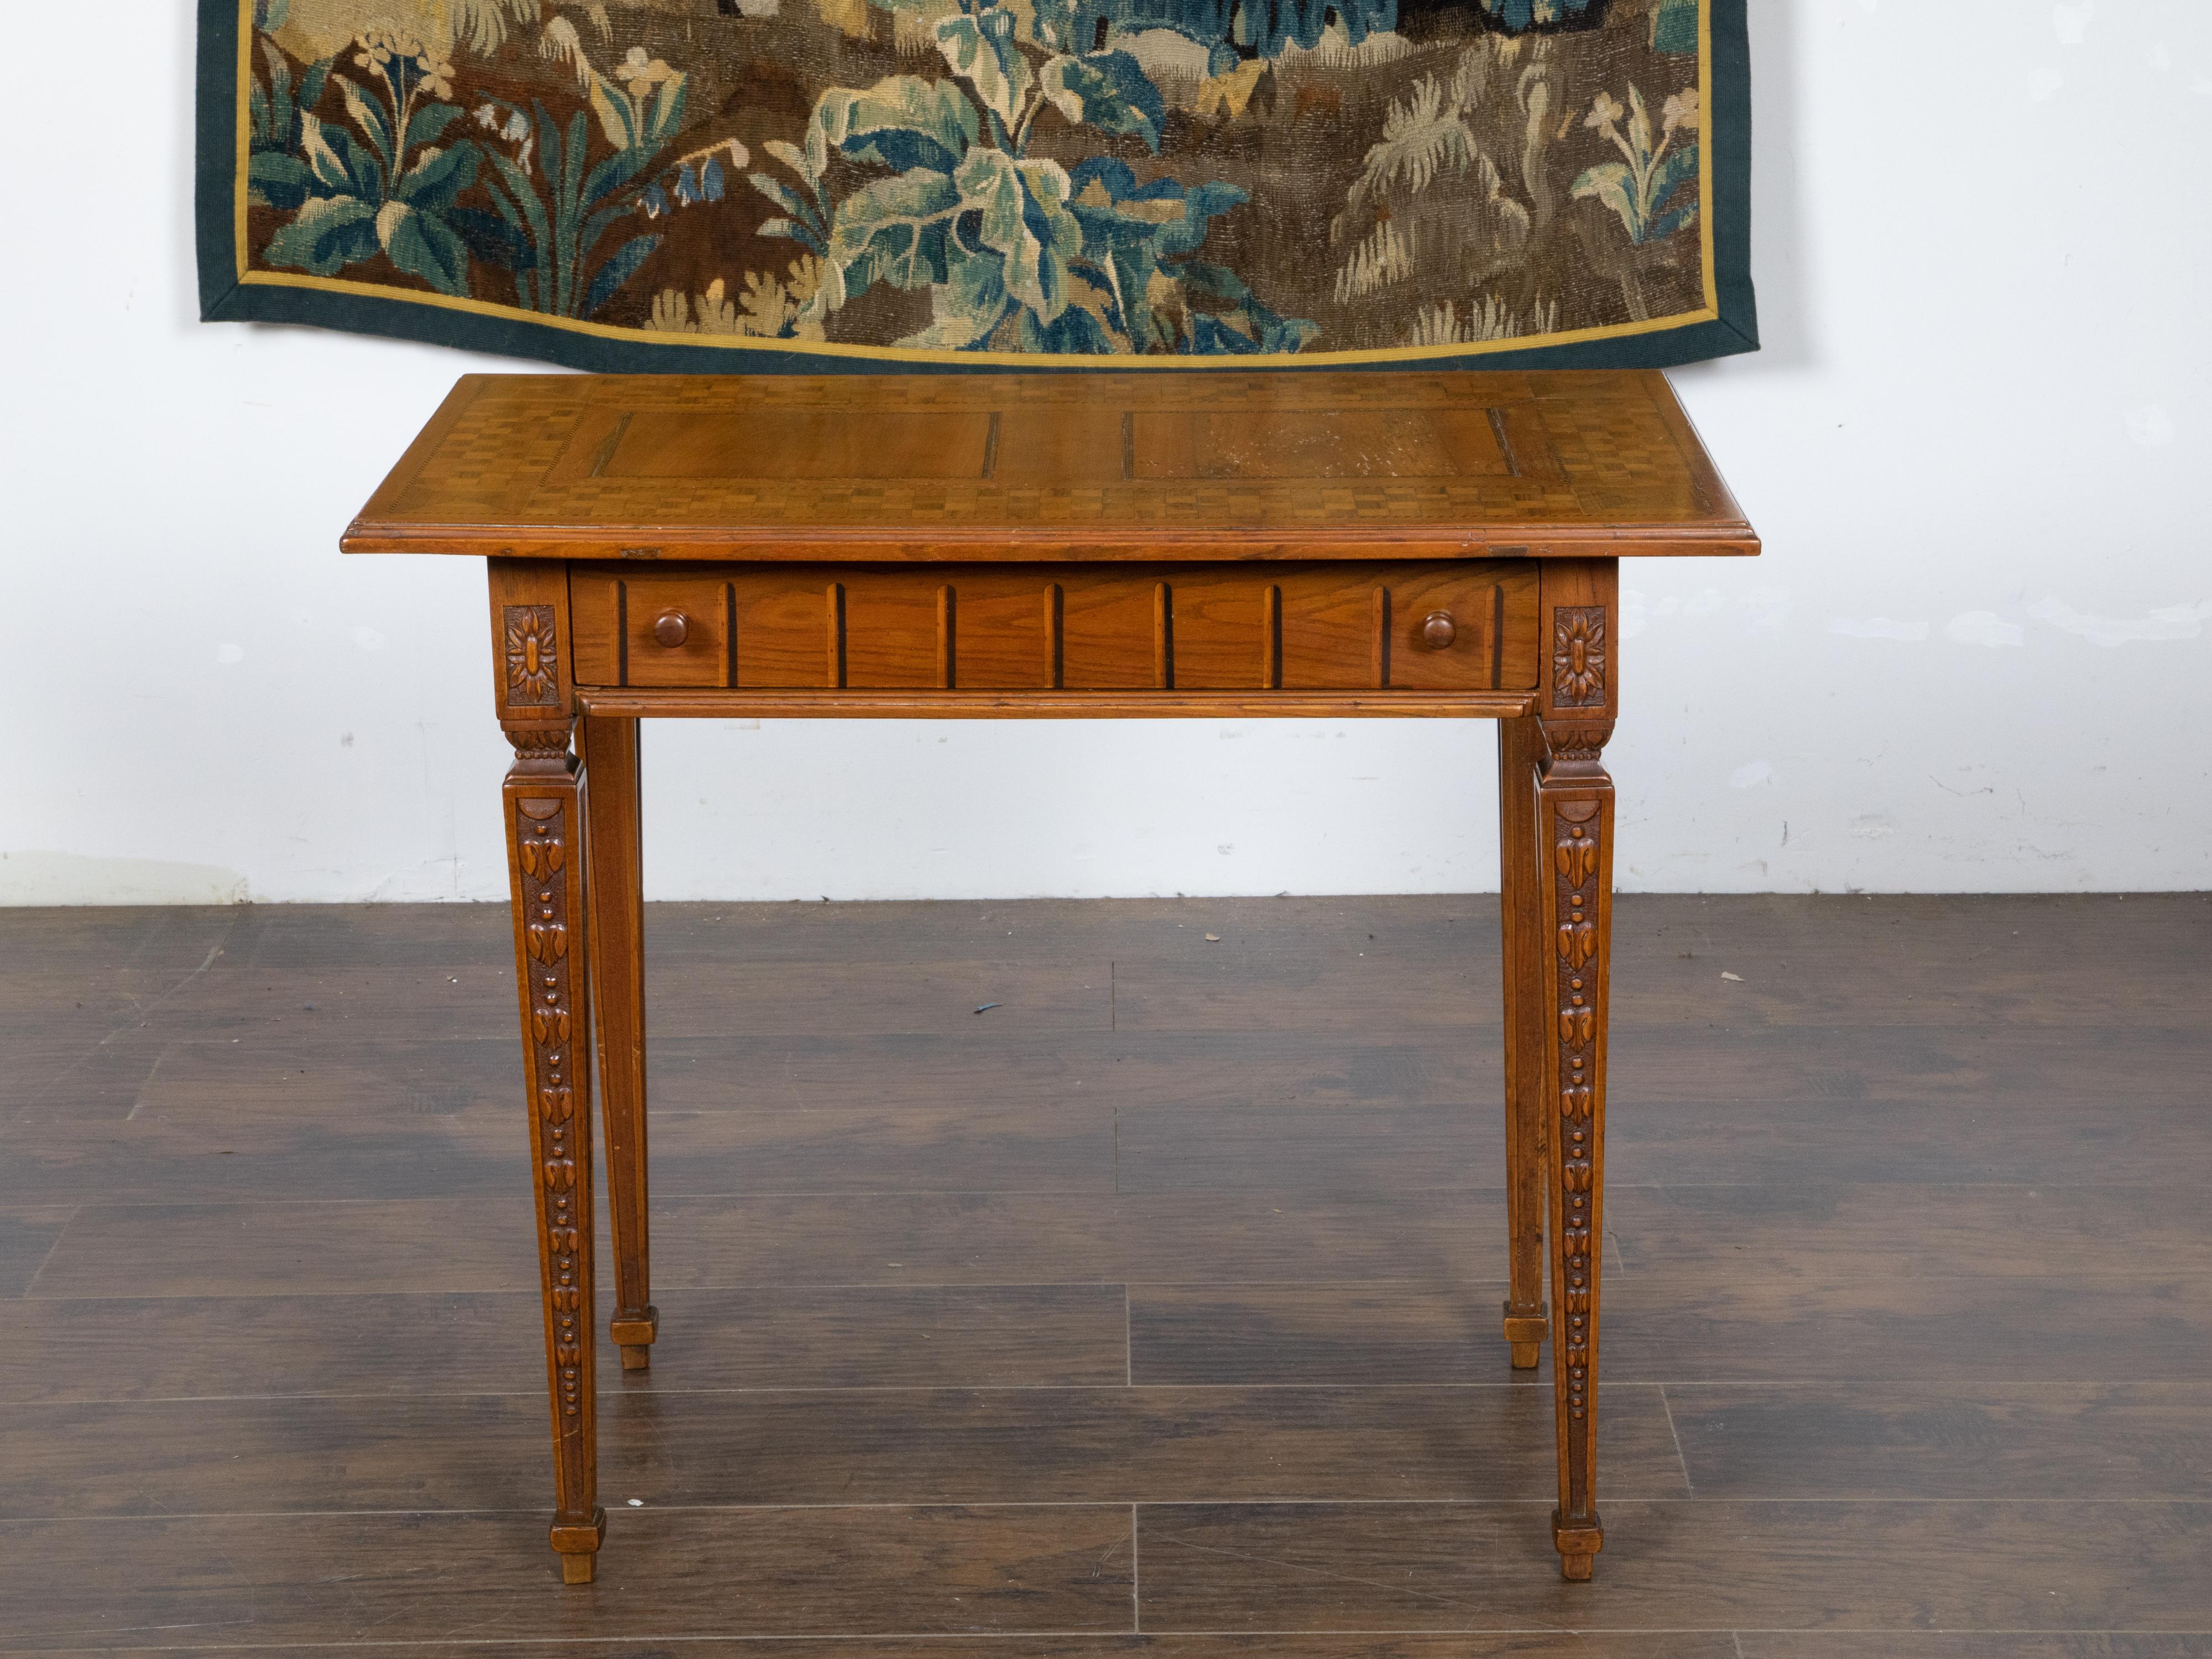 A French Napoléon III period walnut side table from the Mid 19th Century, with inlaid parquetry top, single drawer and carved tapering legs. Created during the reign of France's last Emperor Napoléon III, this walnut table captures our attention